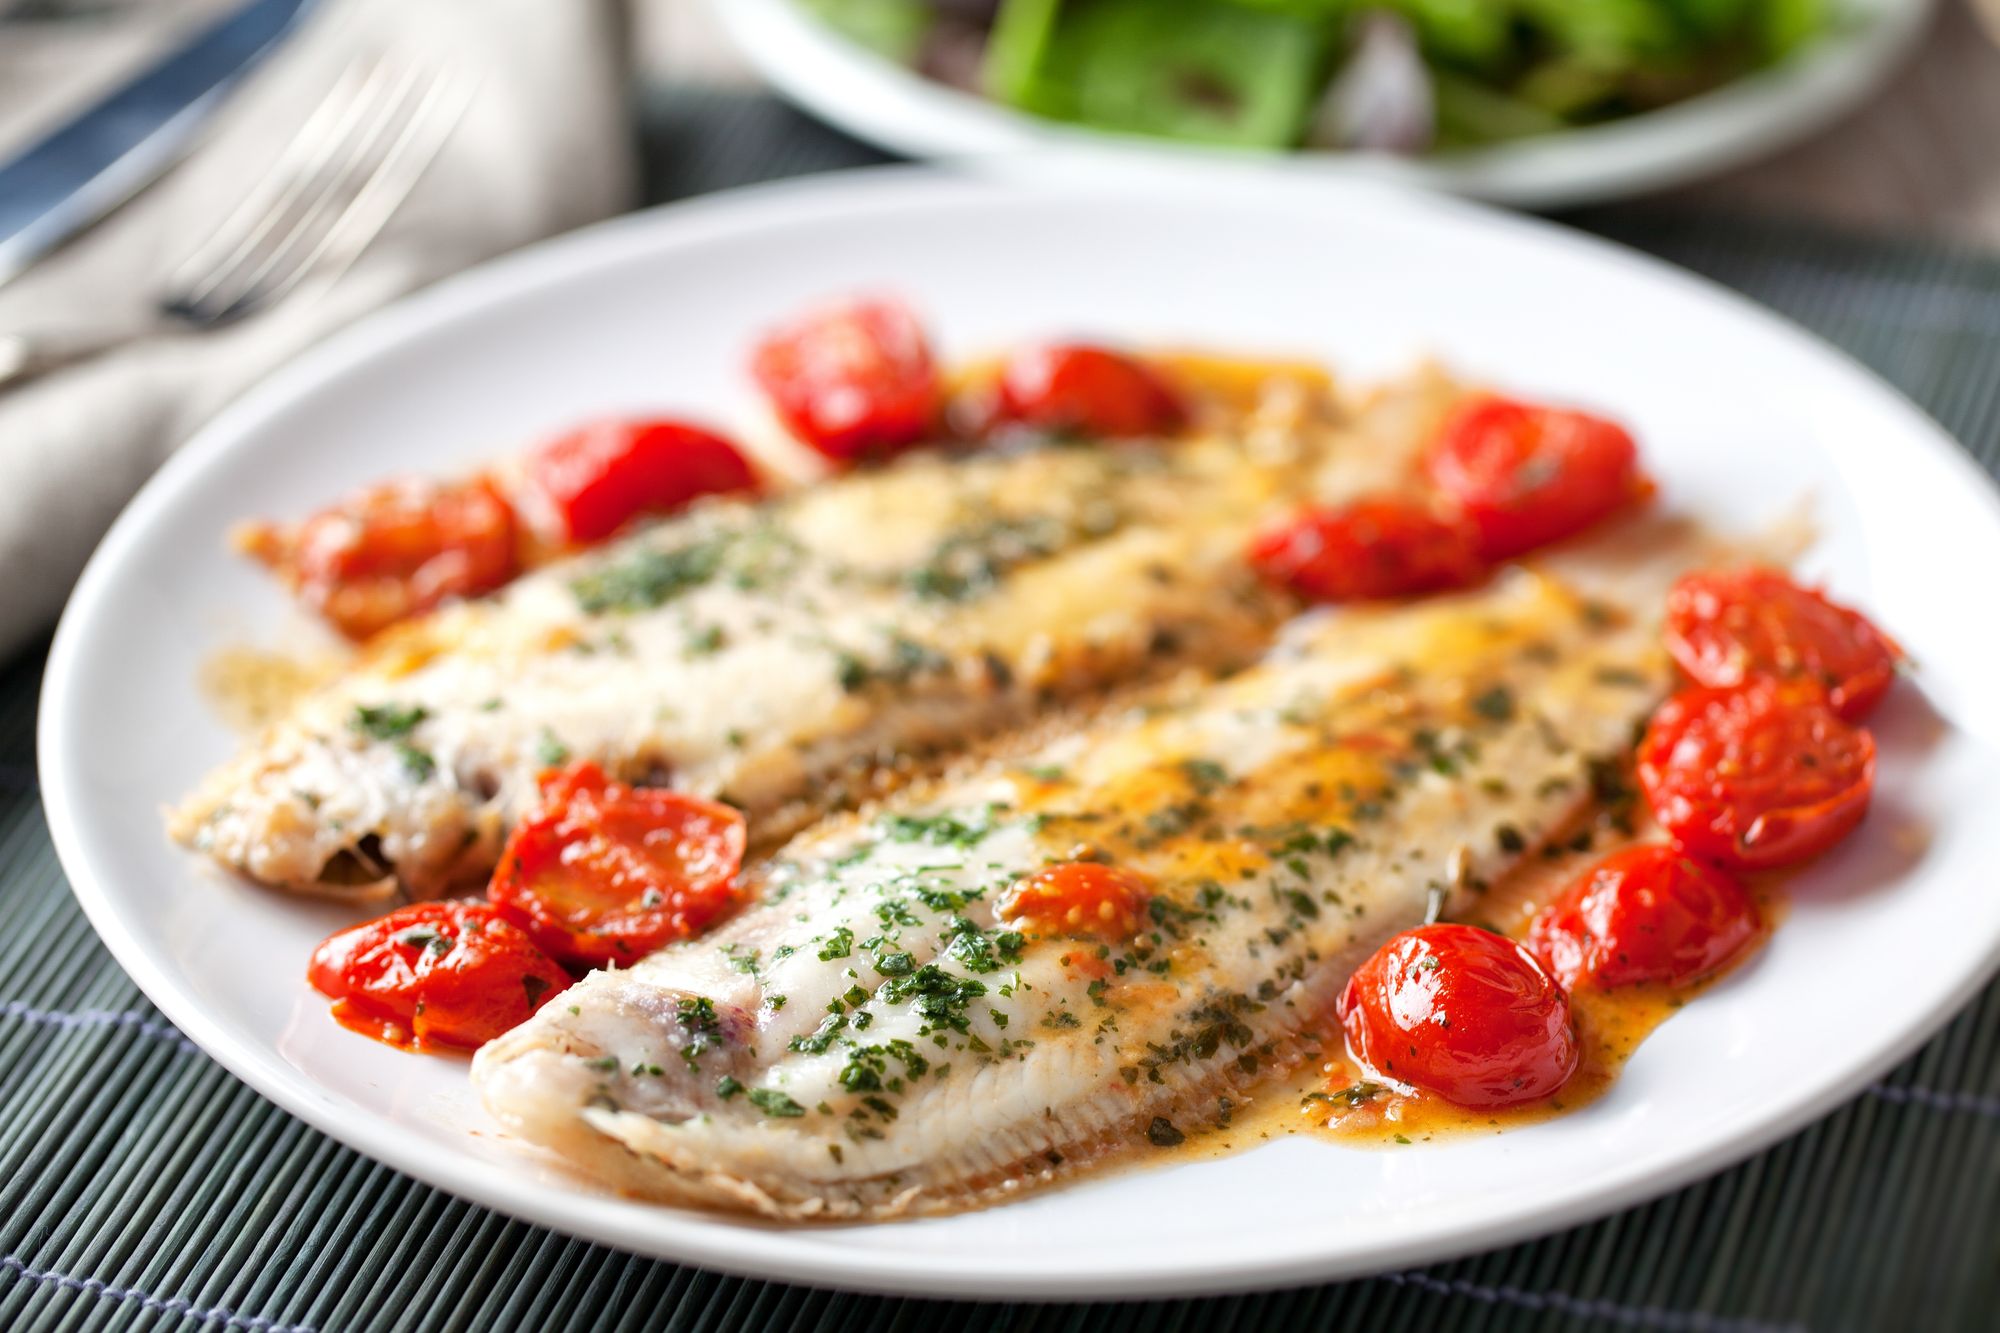 Smoked Haddock with Chives and Tomatoes